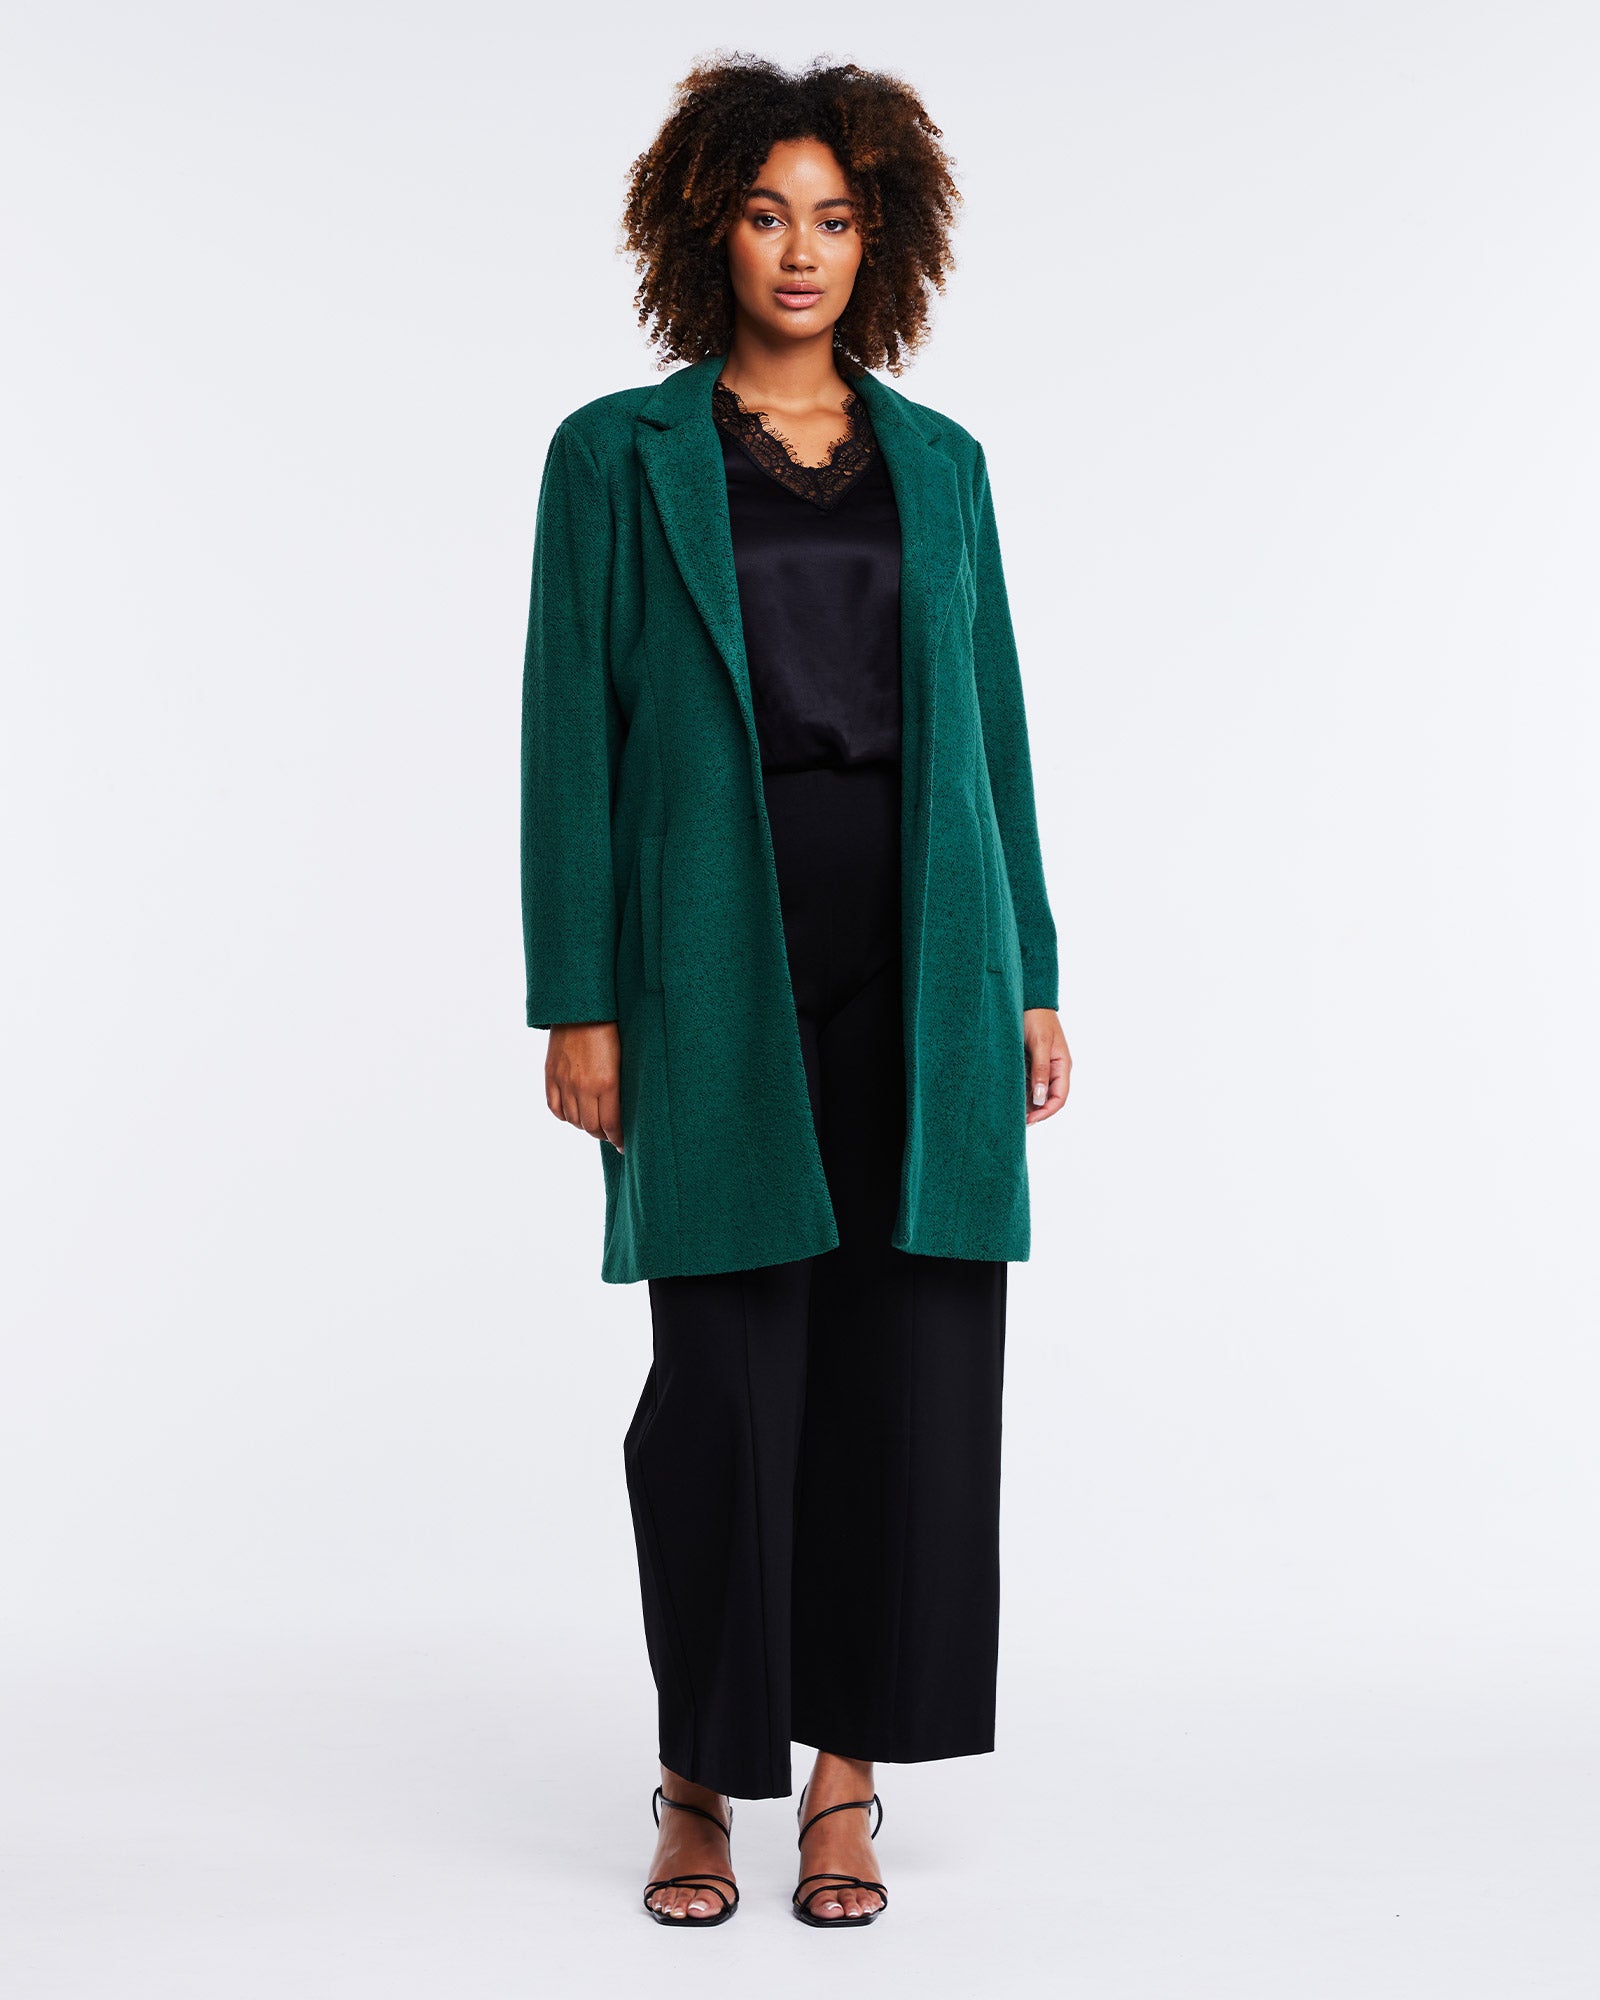 The model is wearing the Wander Green Collared Coat and black wide leg pants from Estelle.